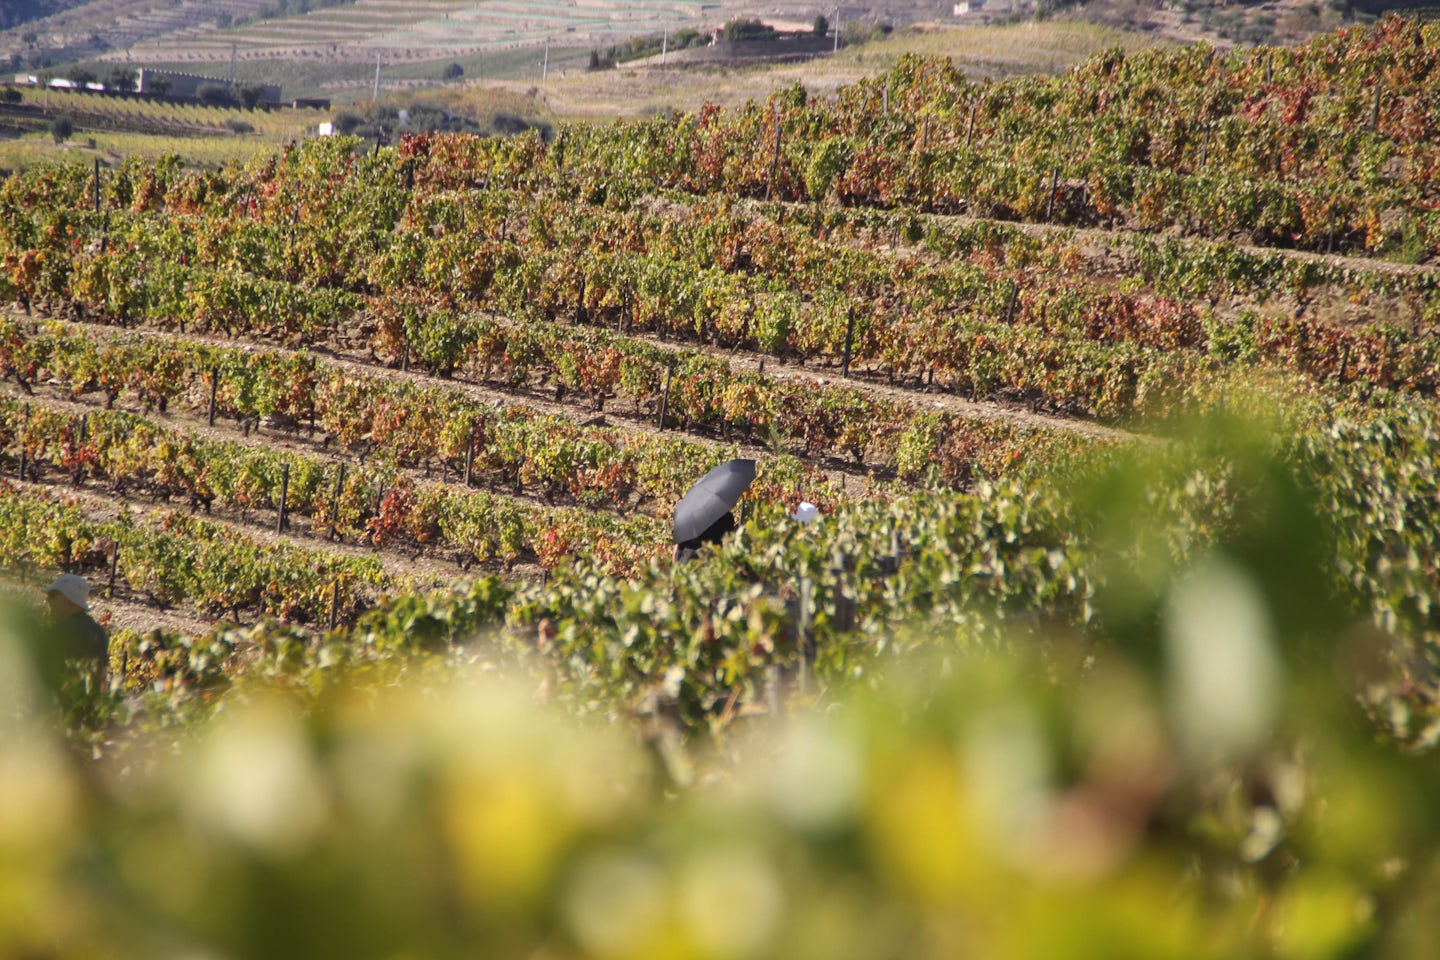 A vineyard in the heart of the Douro Valley